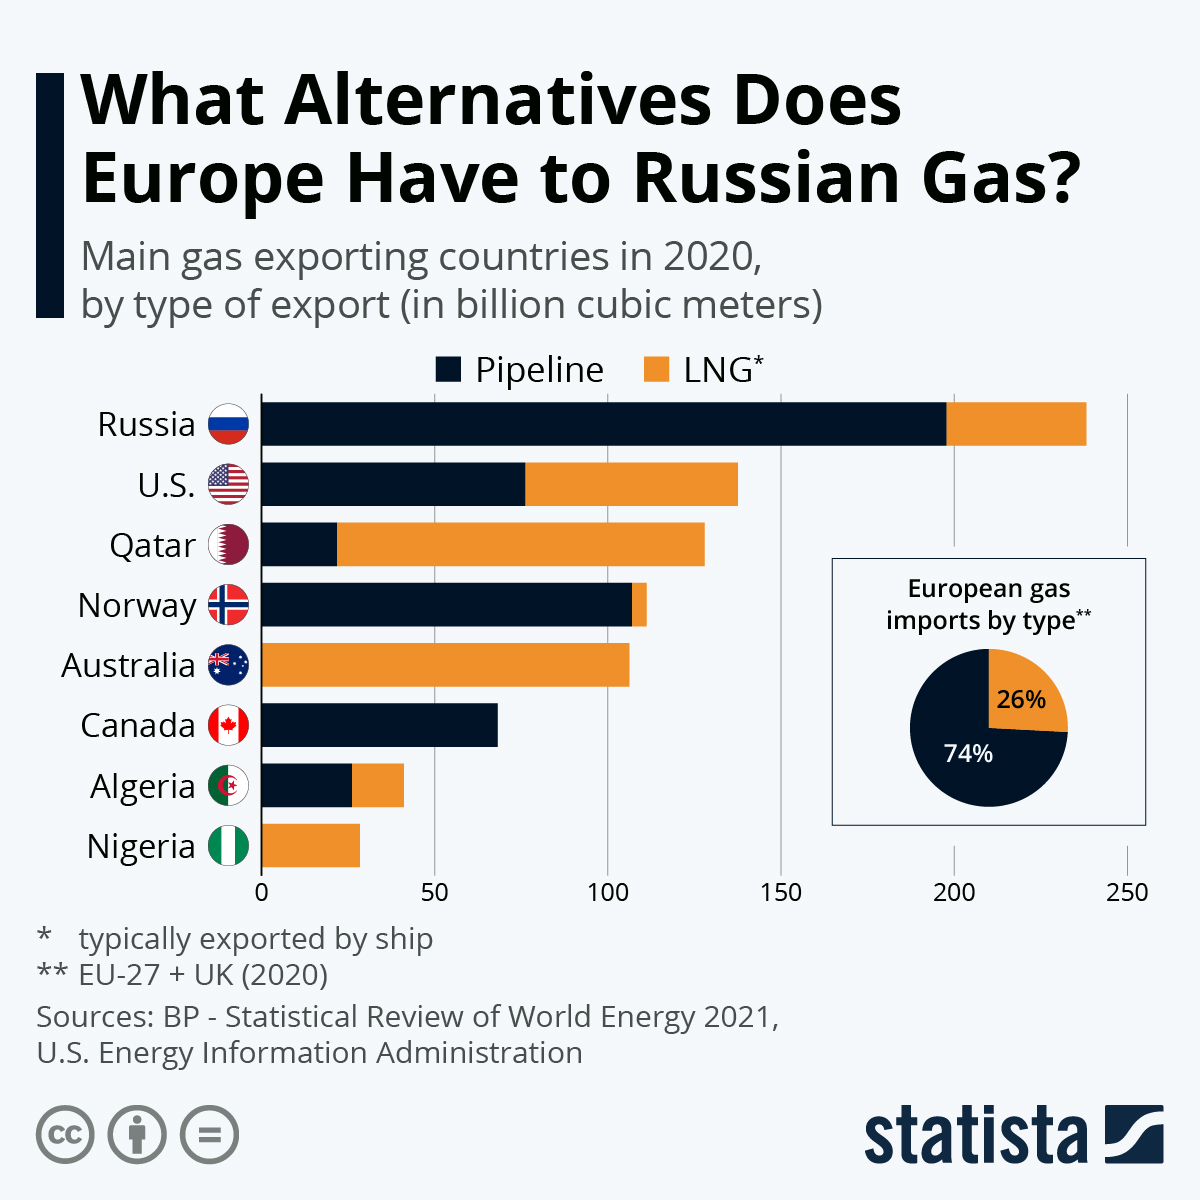 What Alternatives Does Europe Have to Russian Gas?